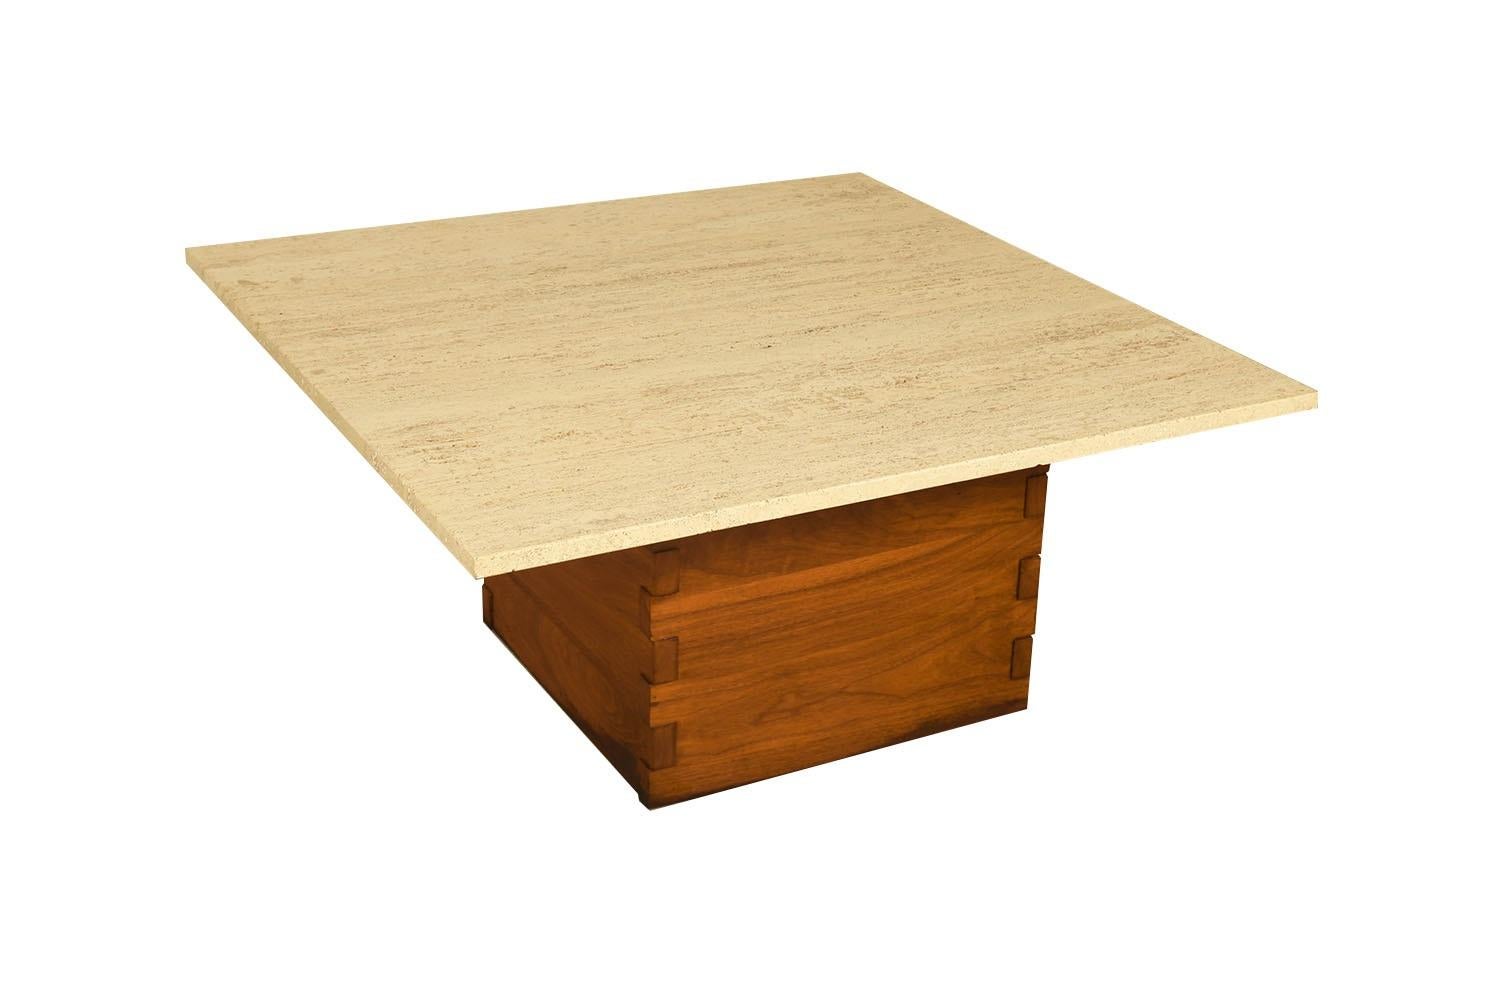 Superb Travertine and walnut Coffee Table with modernist design of remarkable quality. Features a strong walnut base accented with stylish large dovetailed joinery supporting a decorative, heavy, thick, travertine stone top. A striking design, the